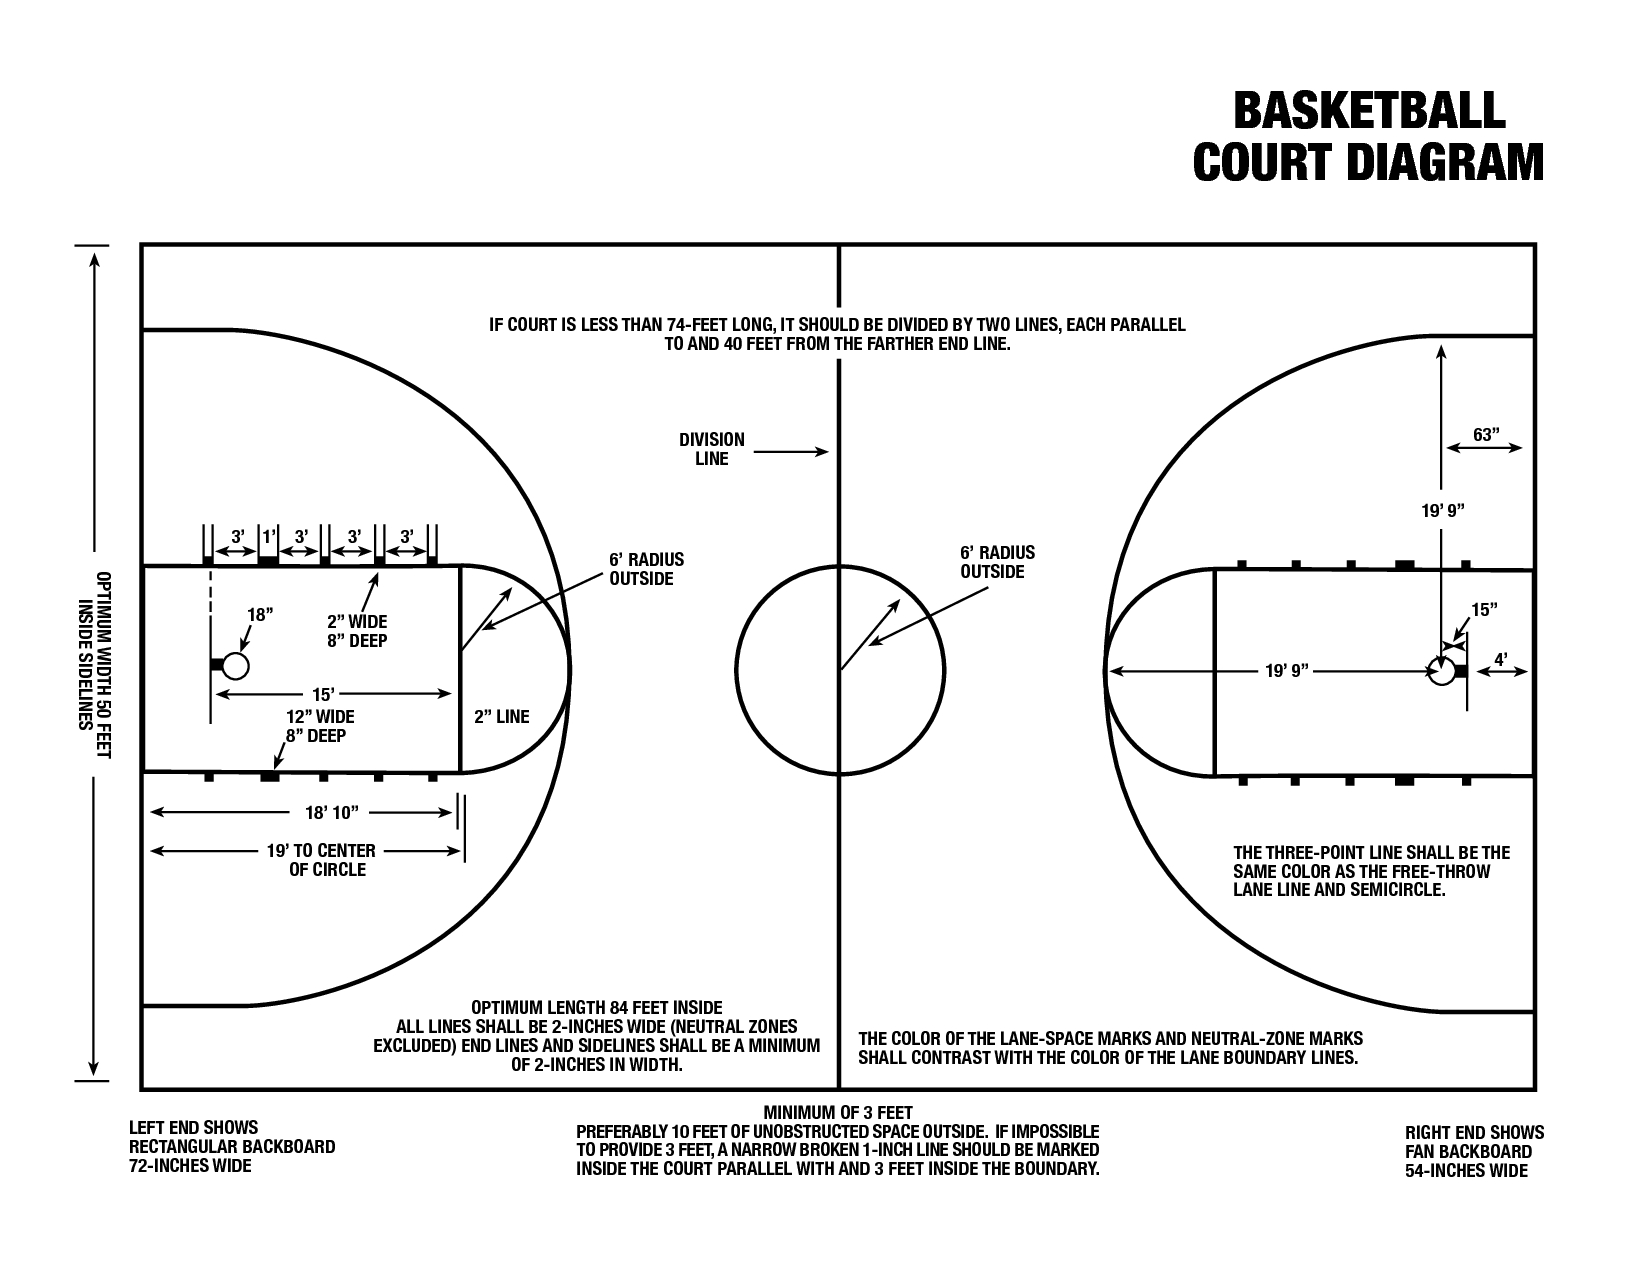 Basketball Court Diagram What To Buy To Make Your Own Basketball Court With Stencils Layouts